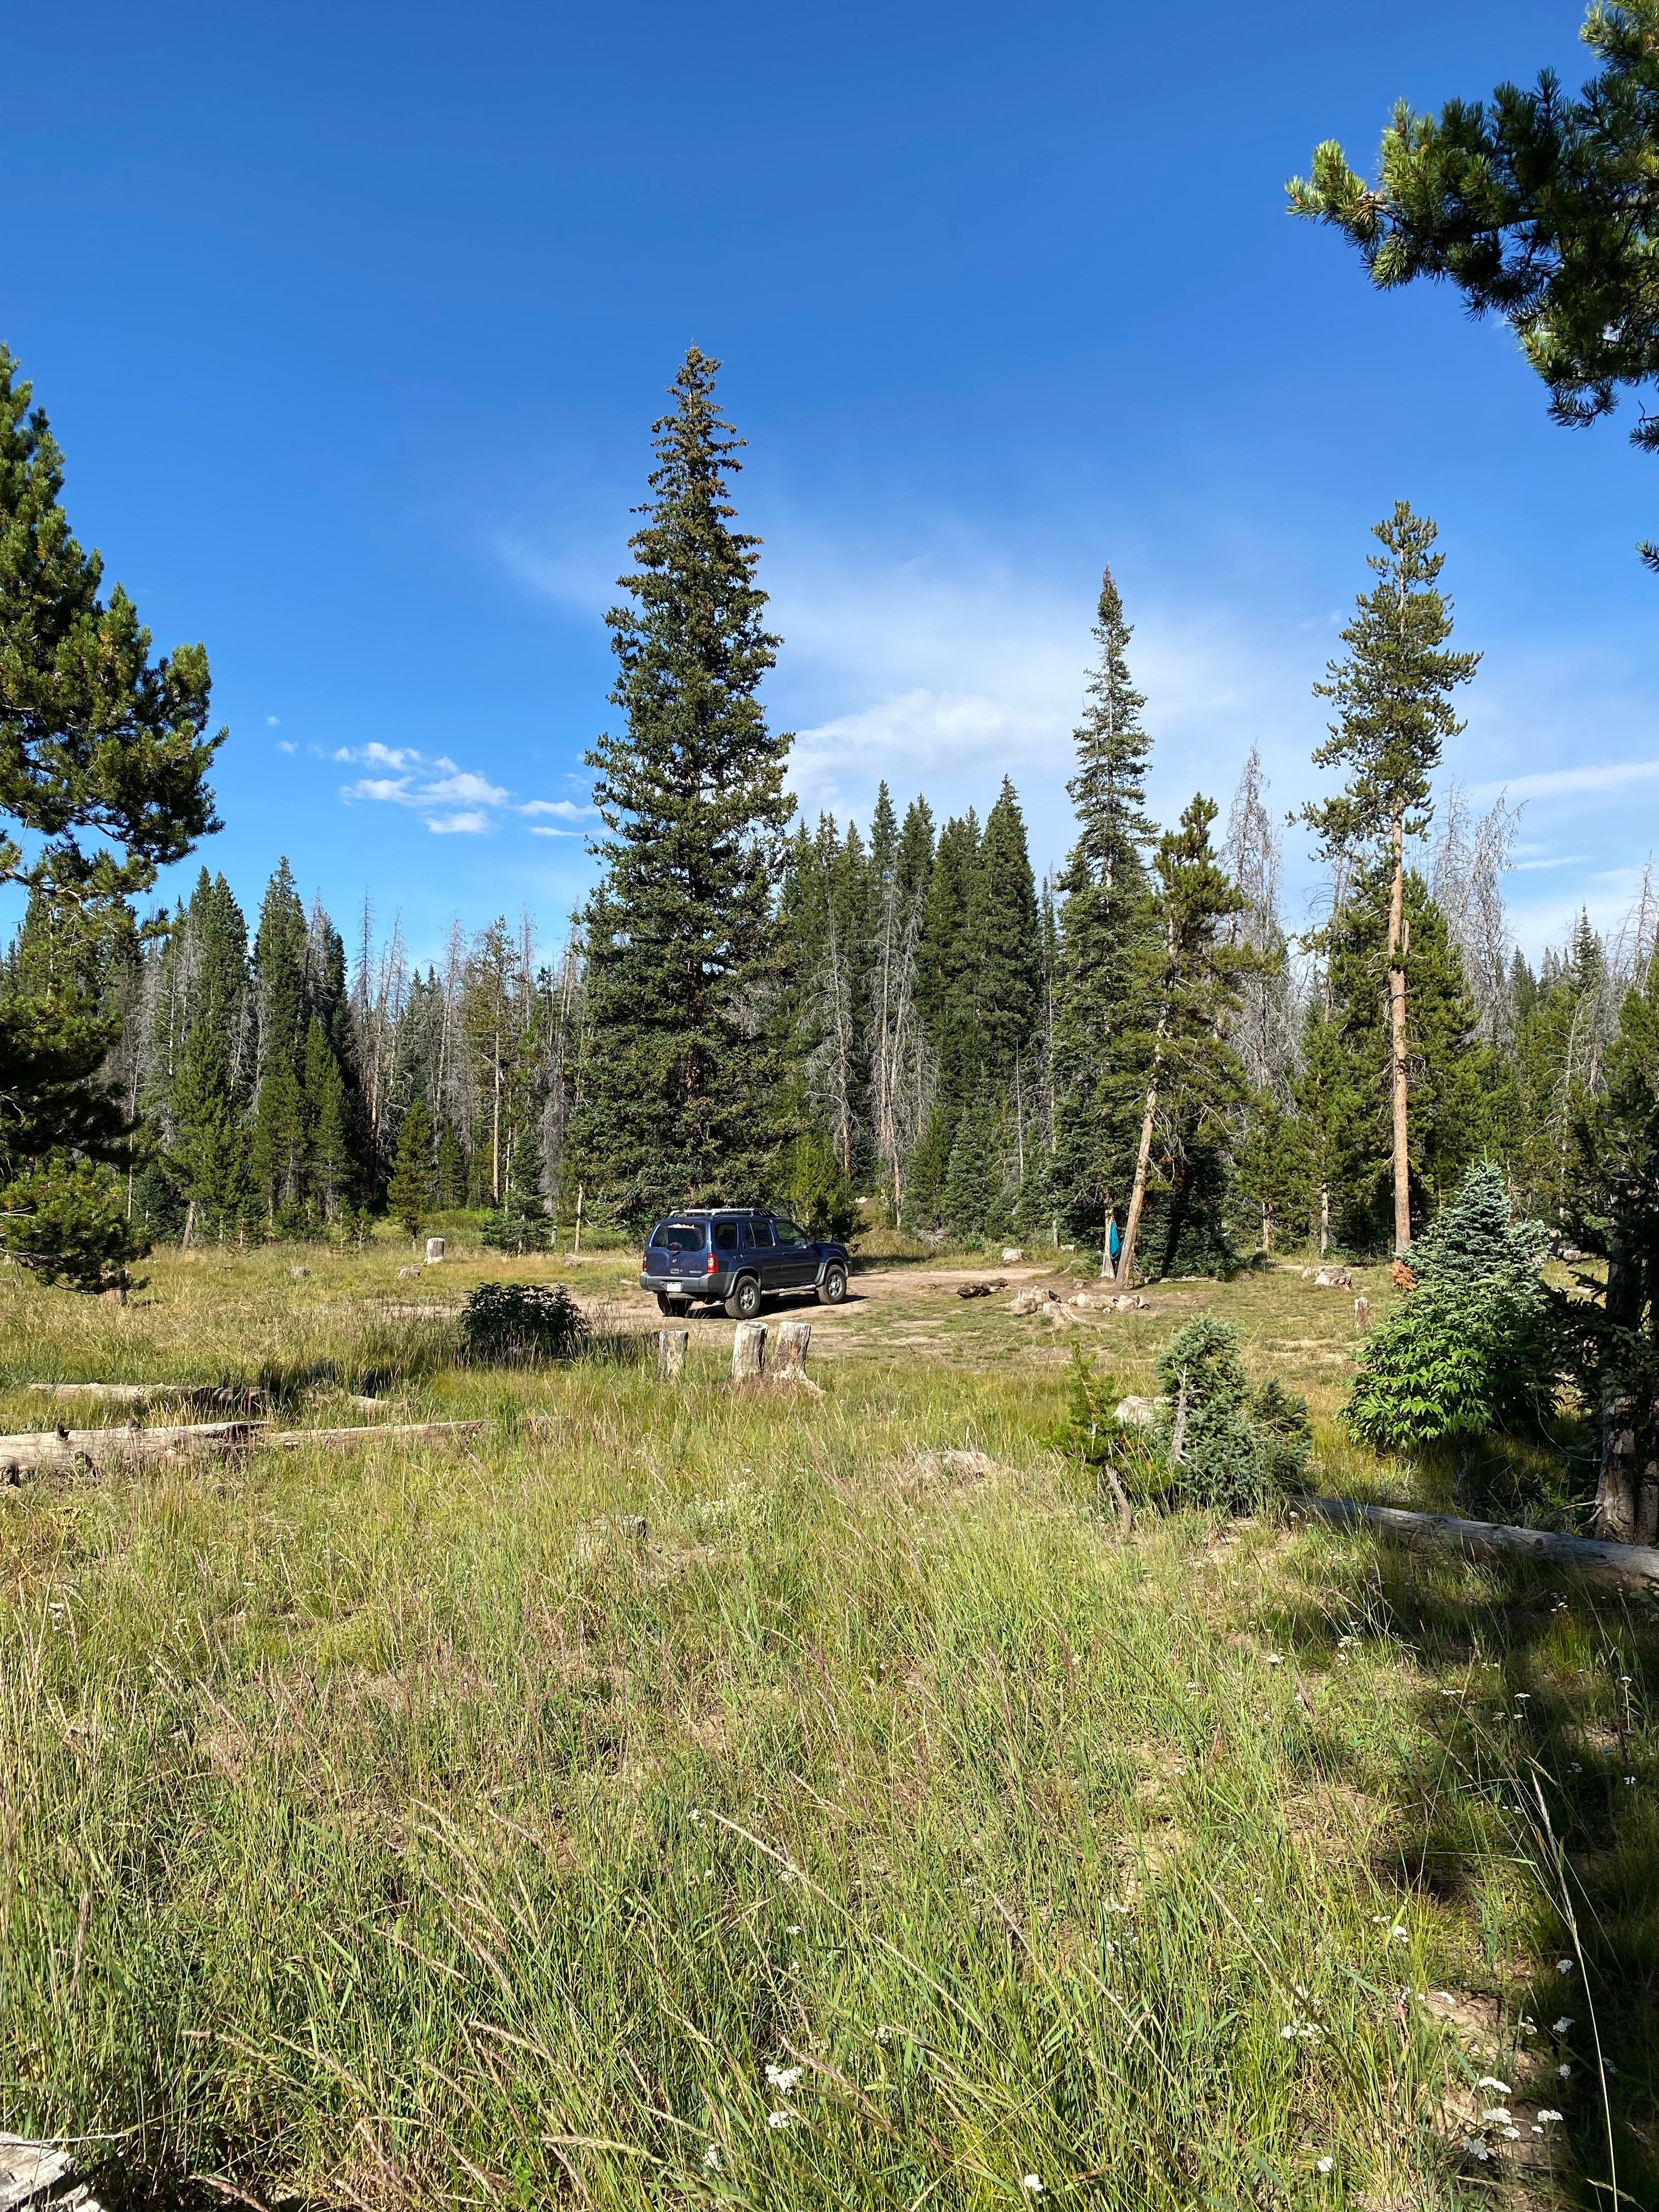 Camper submitted image from FR 302 Rabbit Ears Pass - dispersed camping  - 2